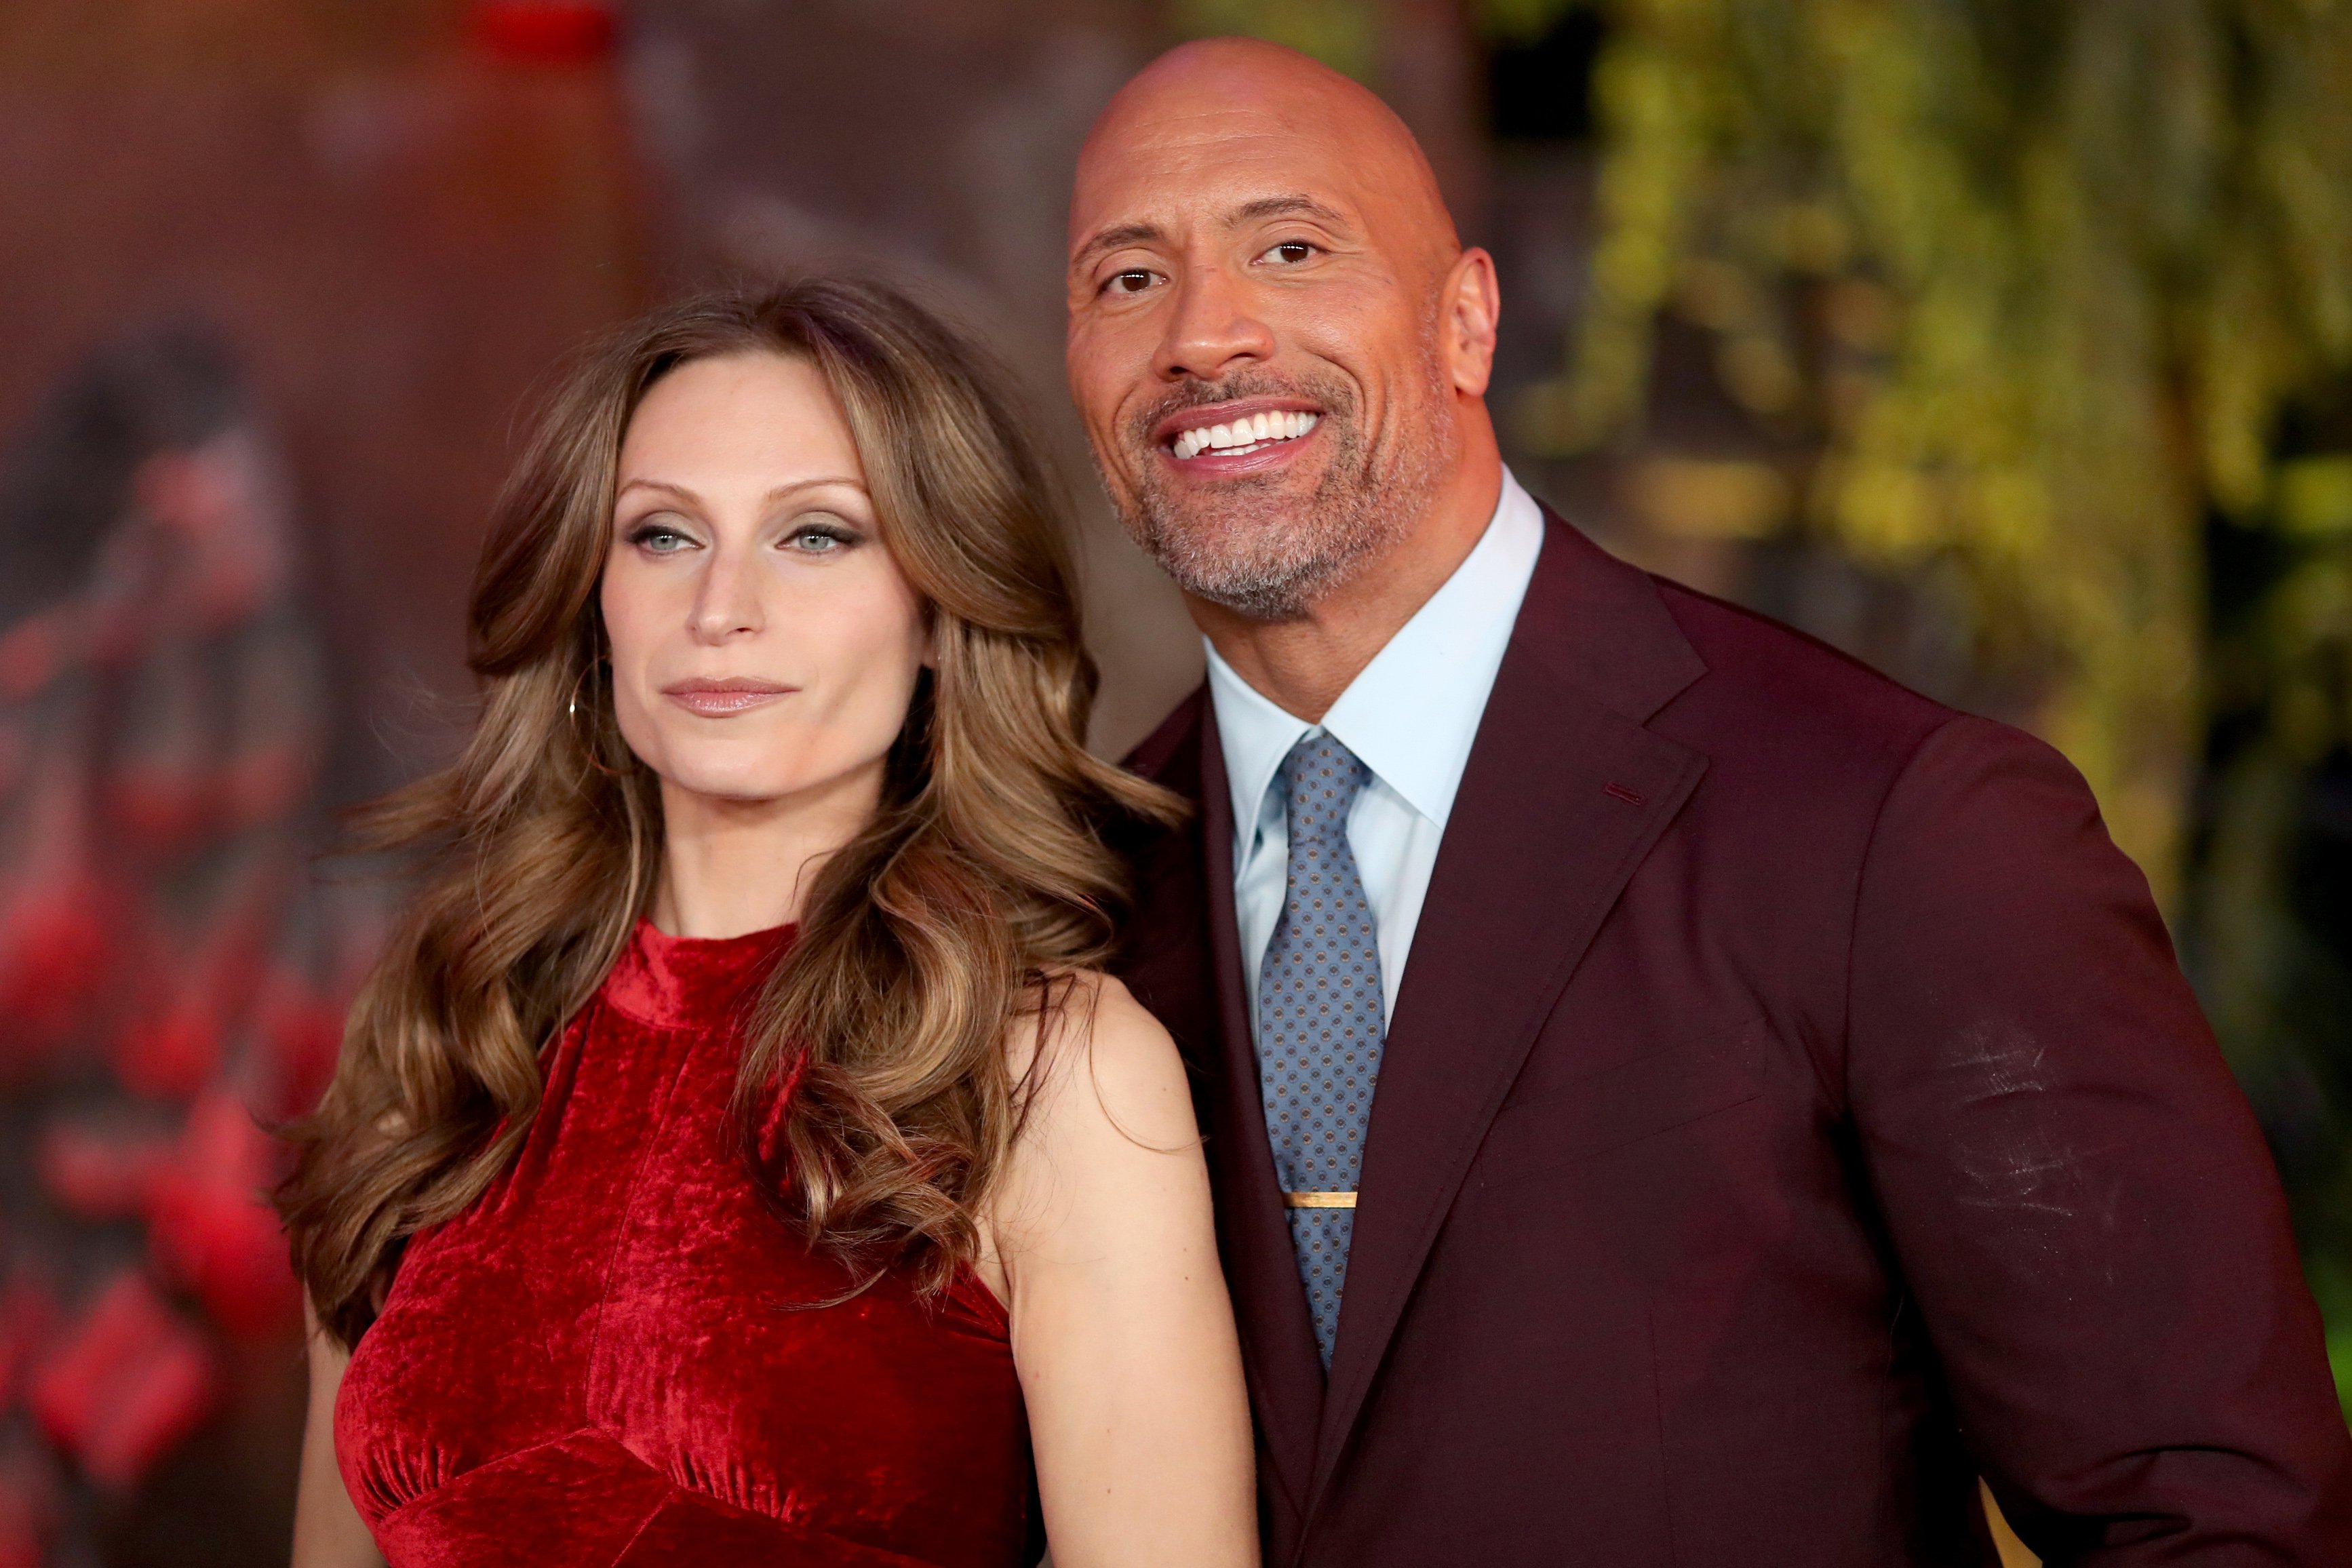 Lauren Hashian and Dwayne Johnson attend the premiere of Columbia Pictures' "Jumanji: Welcome To The Jungle" on December 11, 2017, in Hollywood, California. | Source: Getty Images.